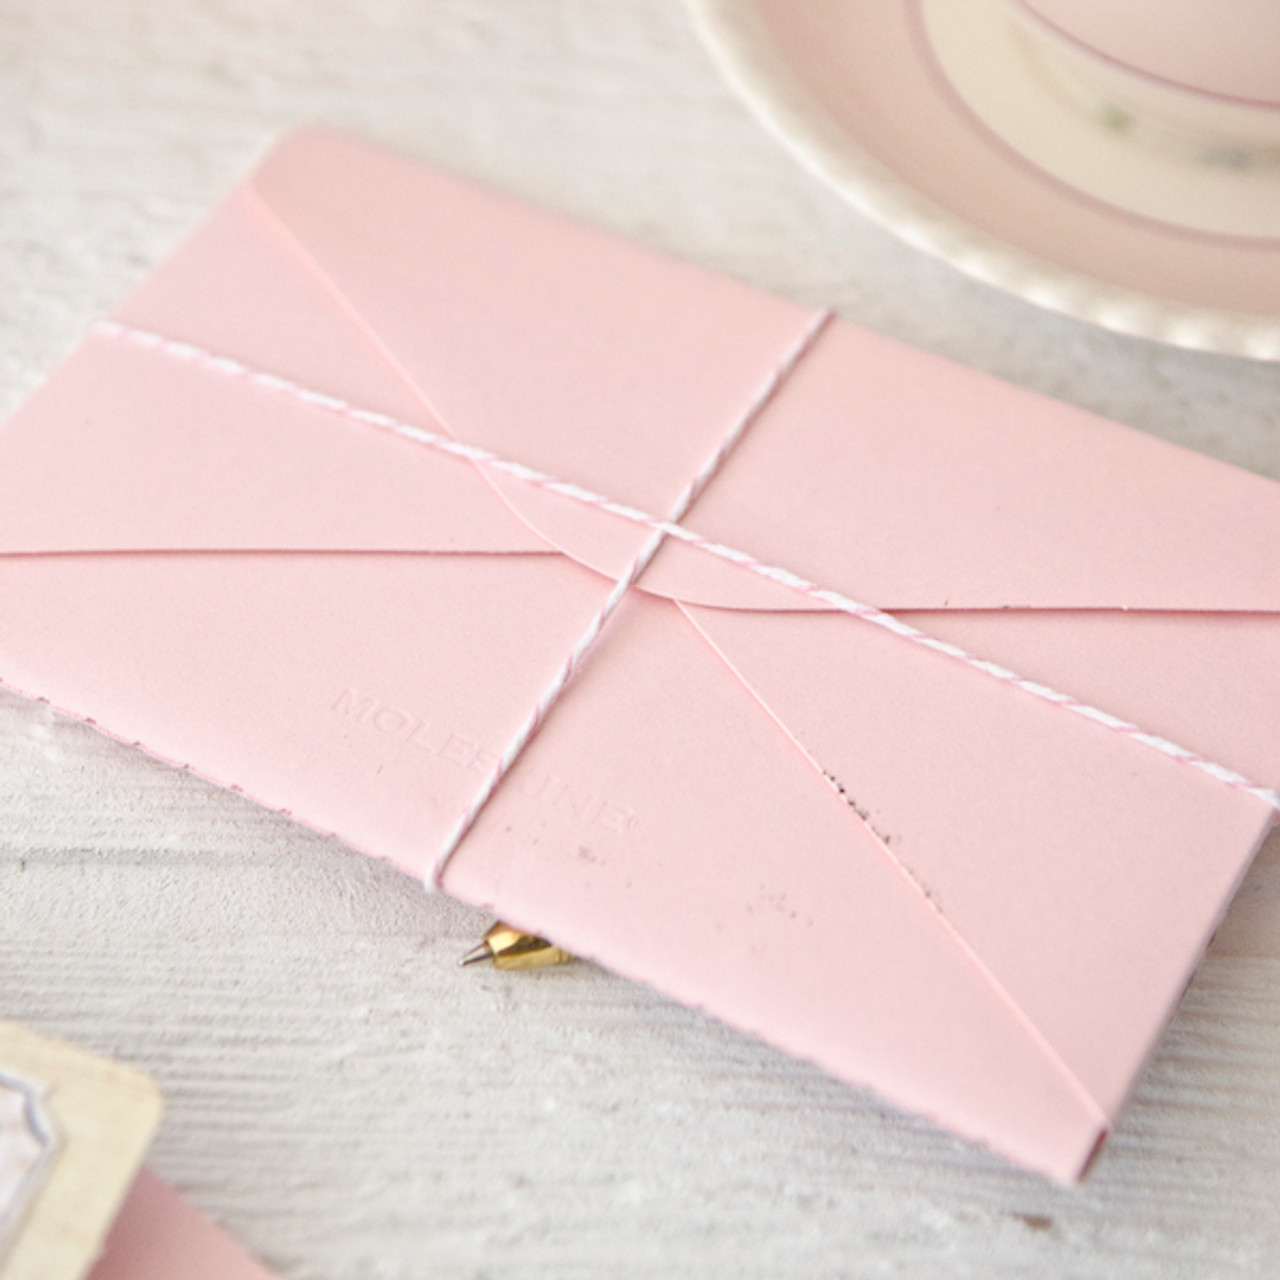 DIY Letter Writing Kit - Moments A Day